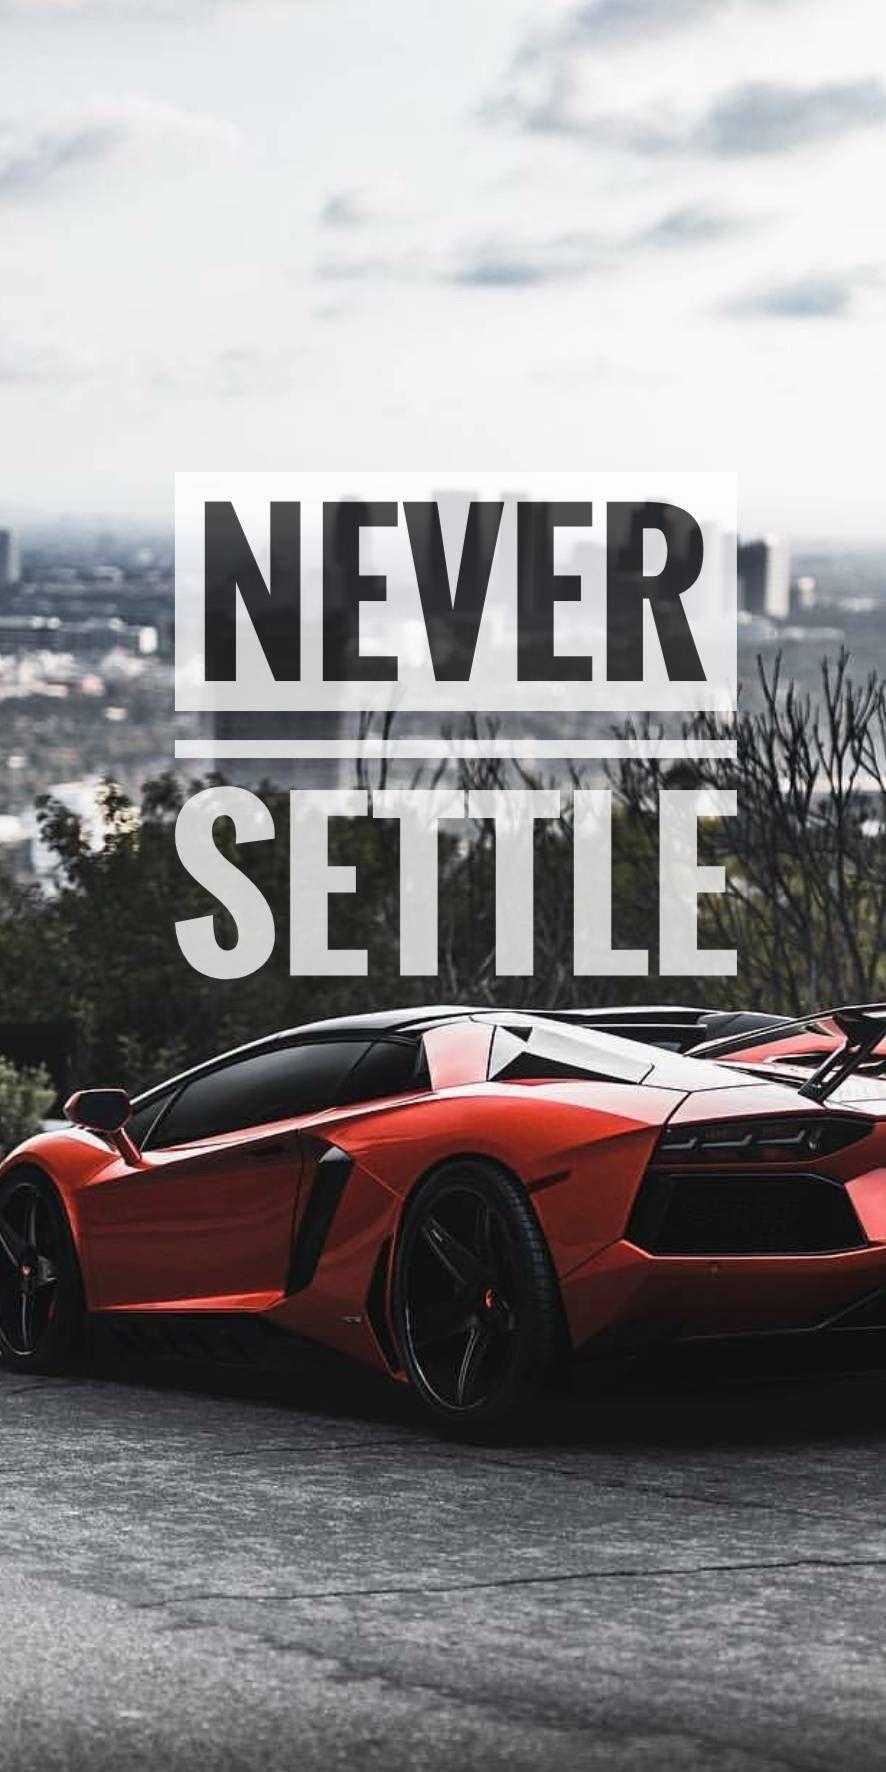 Pin by Verma Rajat on Never settle wallpapers  Never settle wallpapers  Oneplus wallpapers Never settle